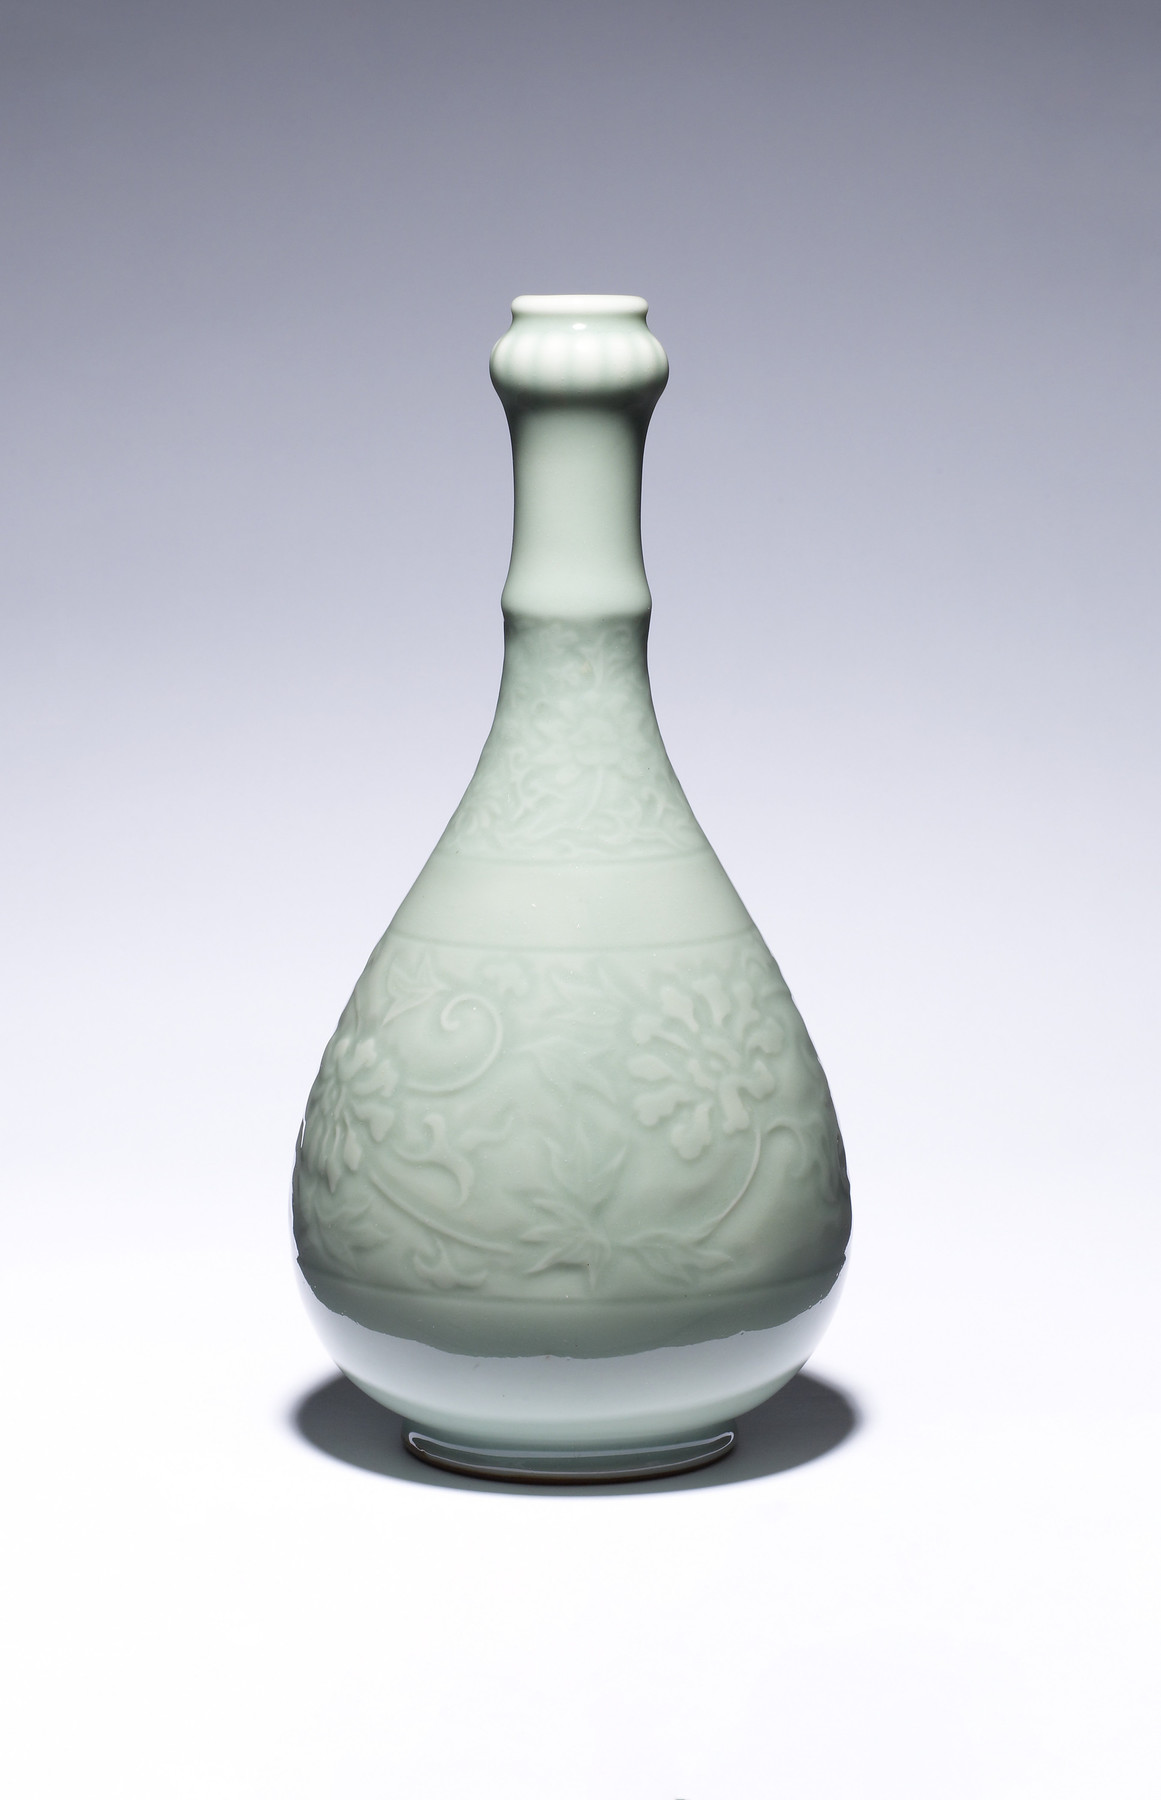 Image for Celadon Vase ("Kabin") with Lotus and Chrysanthemum Scrolls in Relief